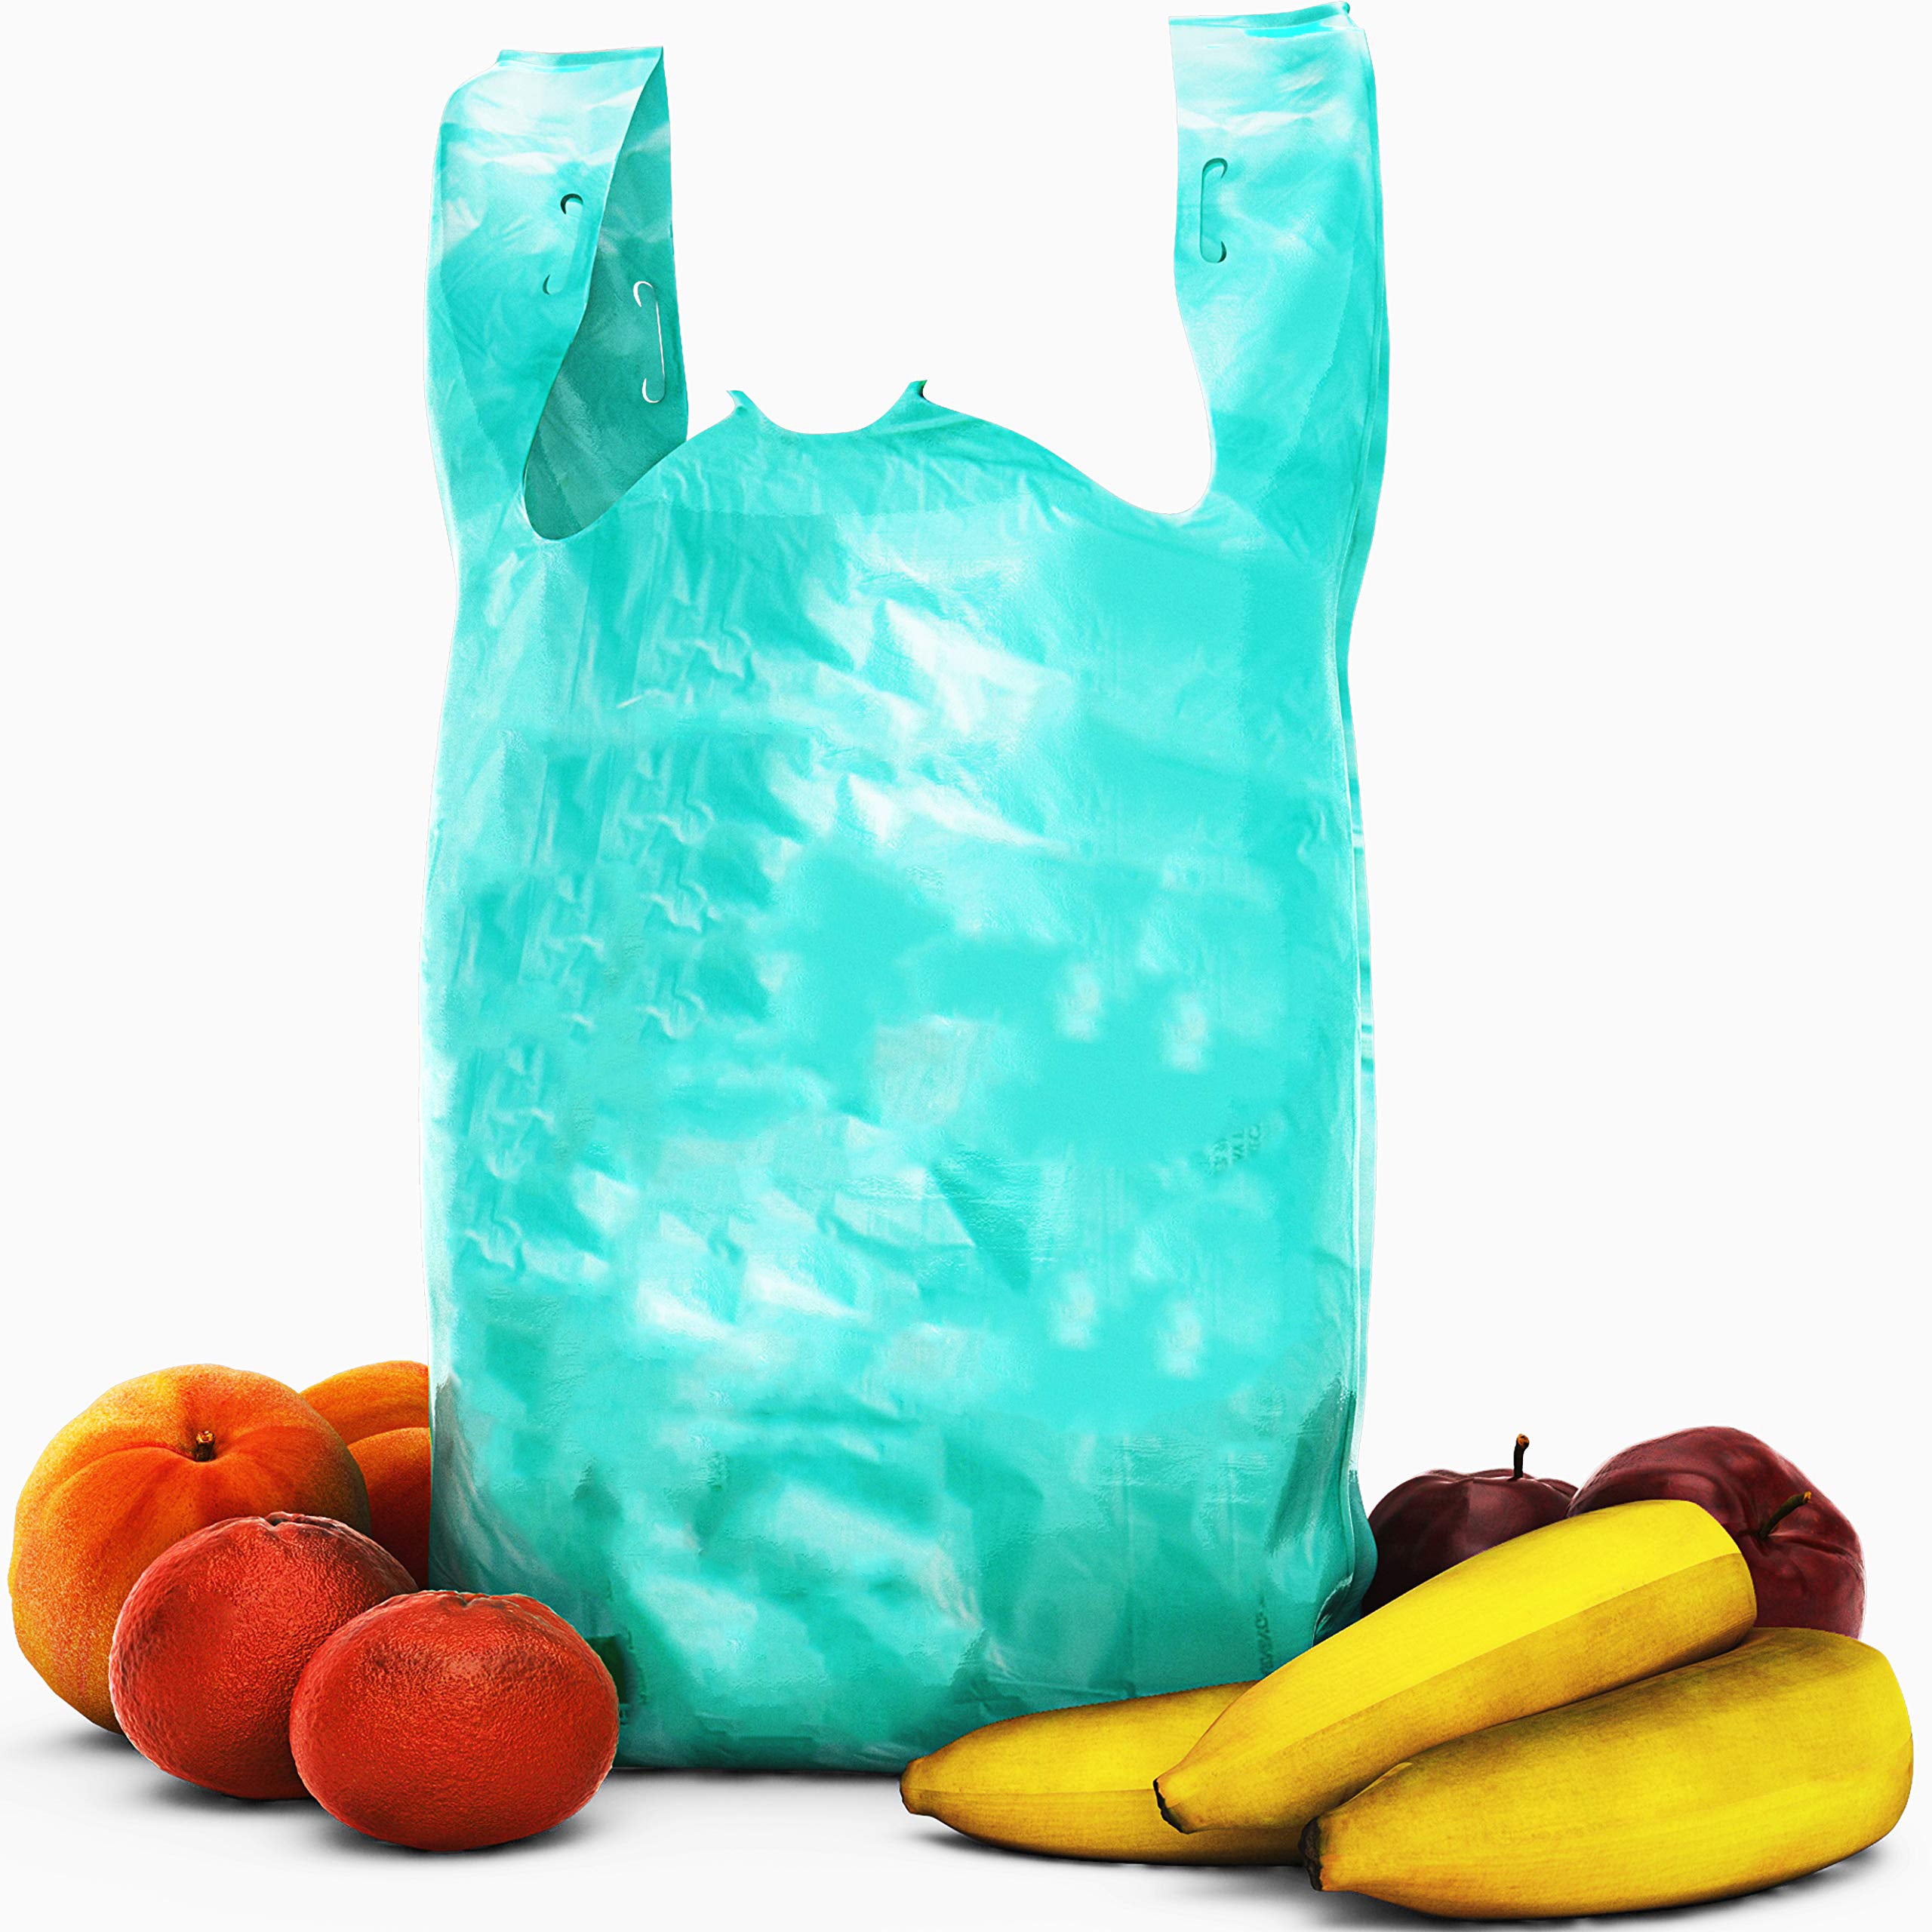 Biodegradable Grocery Bags Wholesale